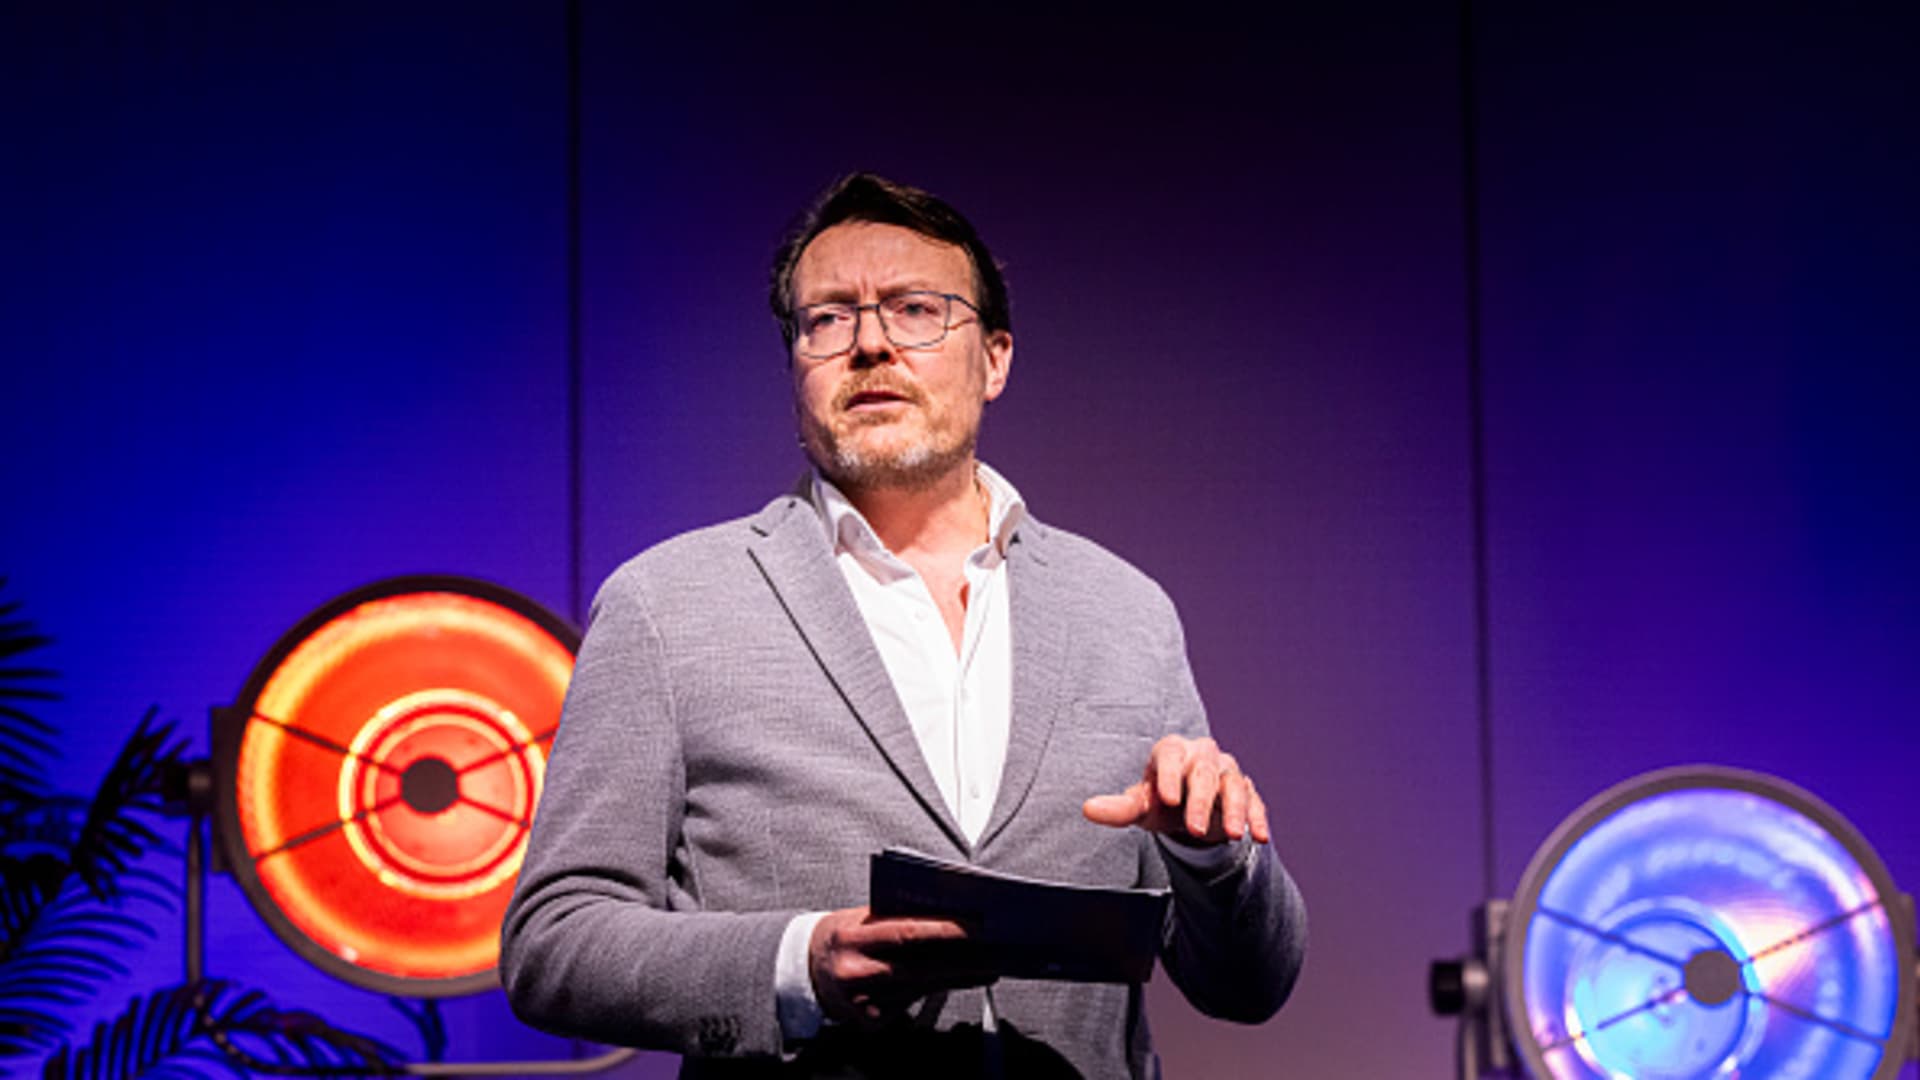 Europe risks falling behind US and China on AI: Prince Constantijn